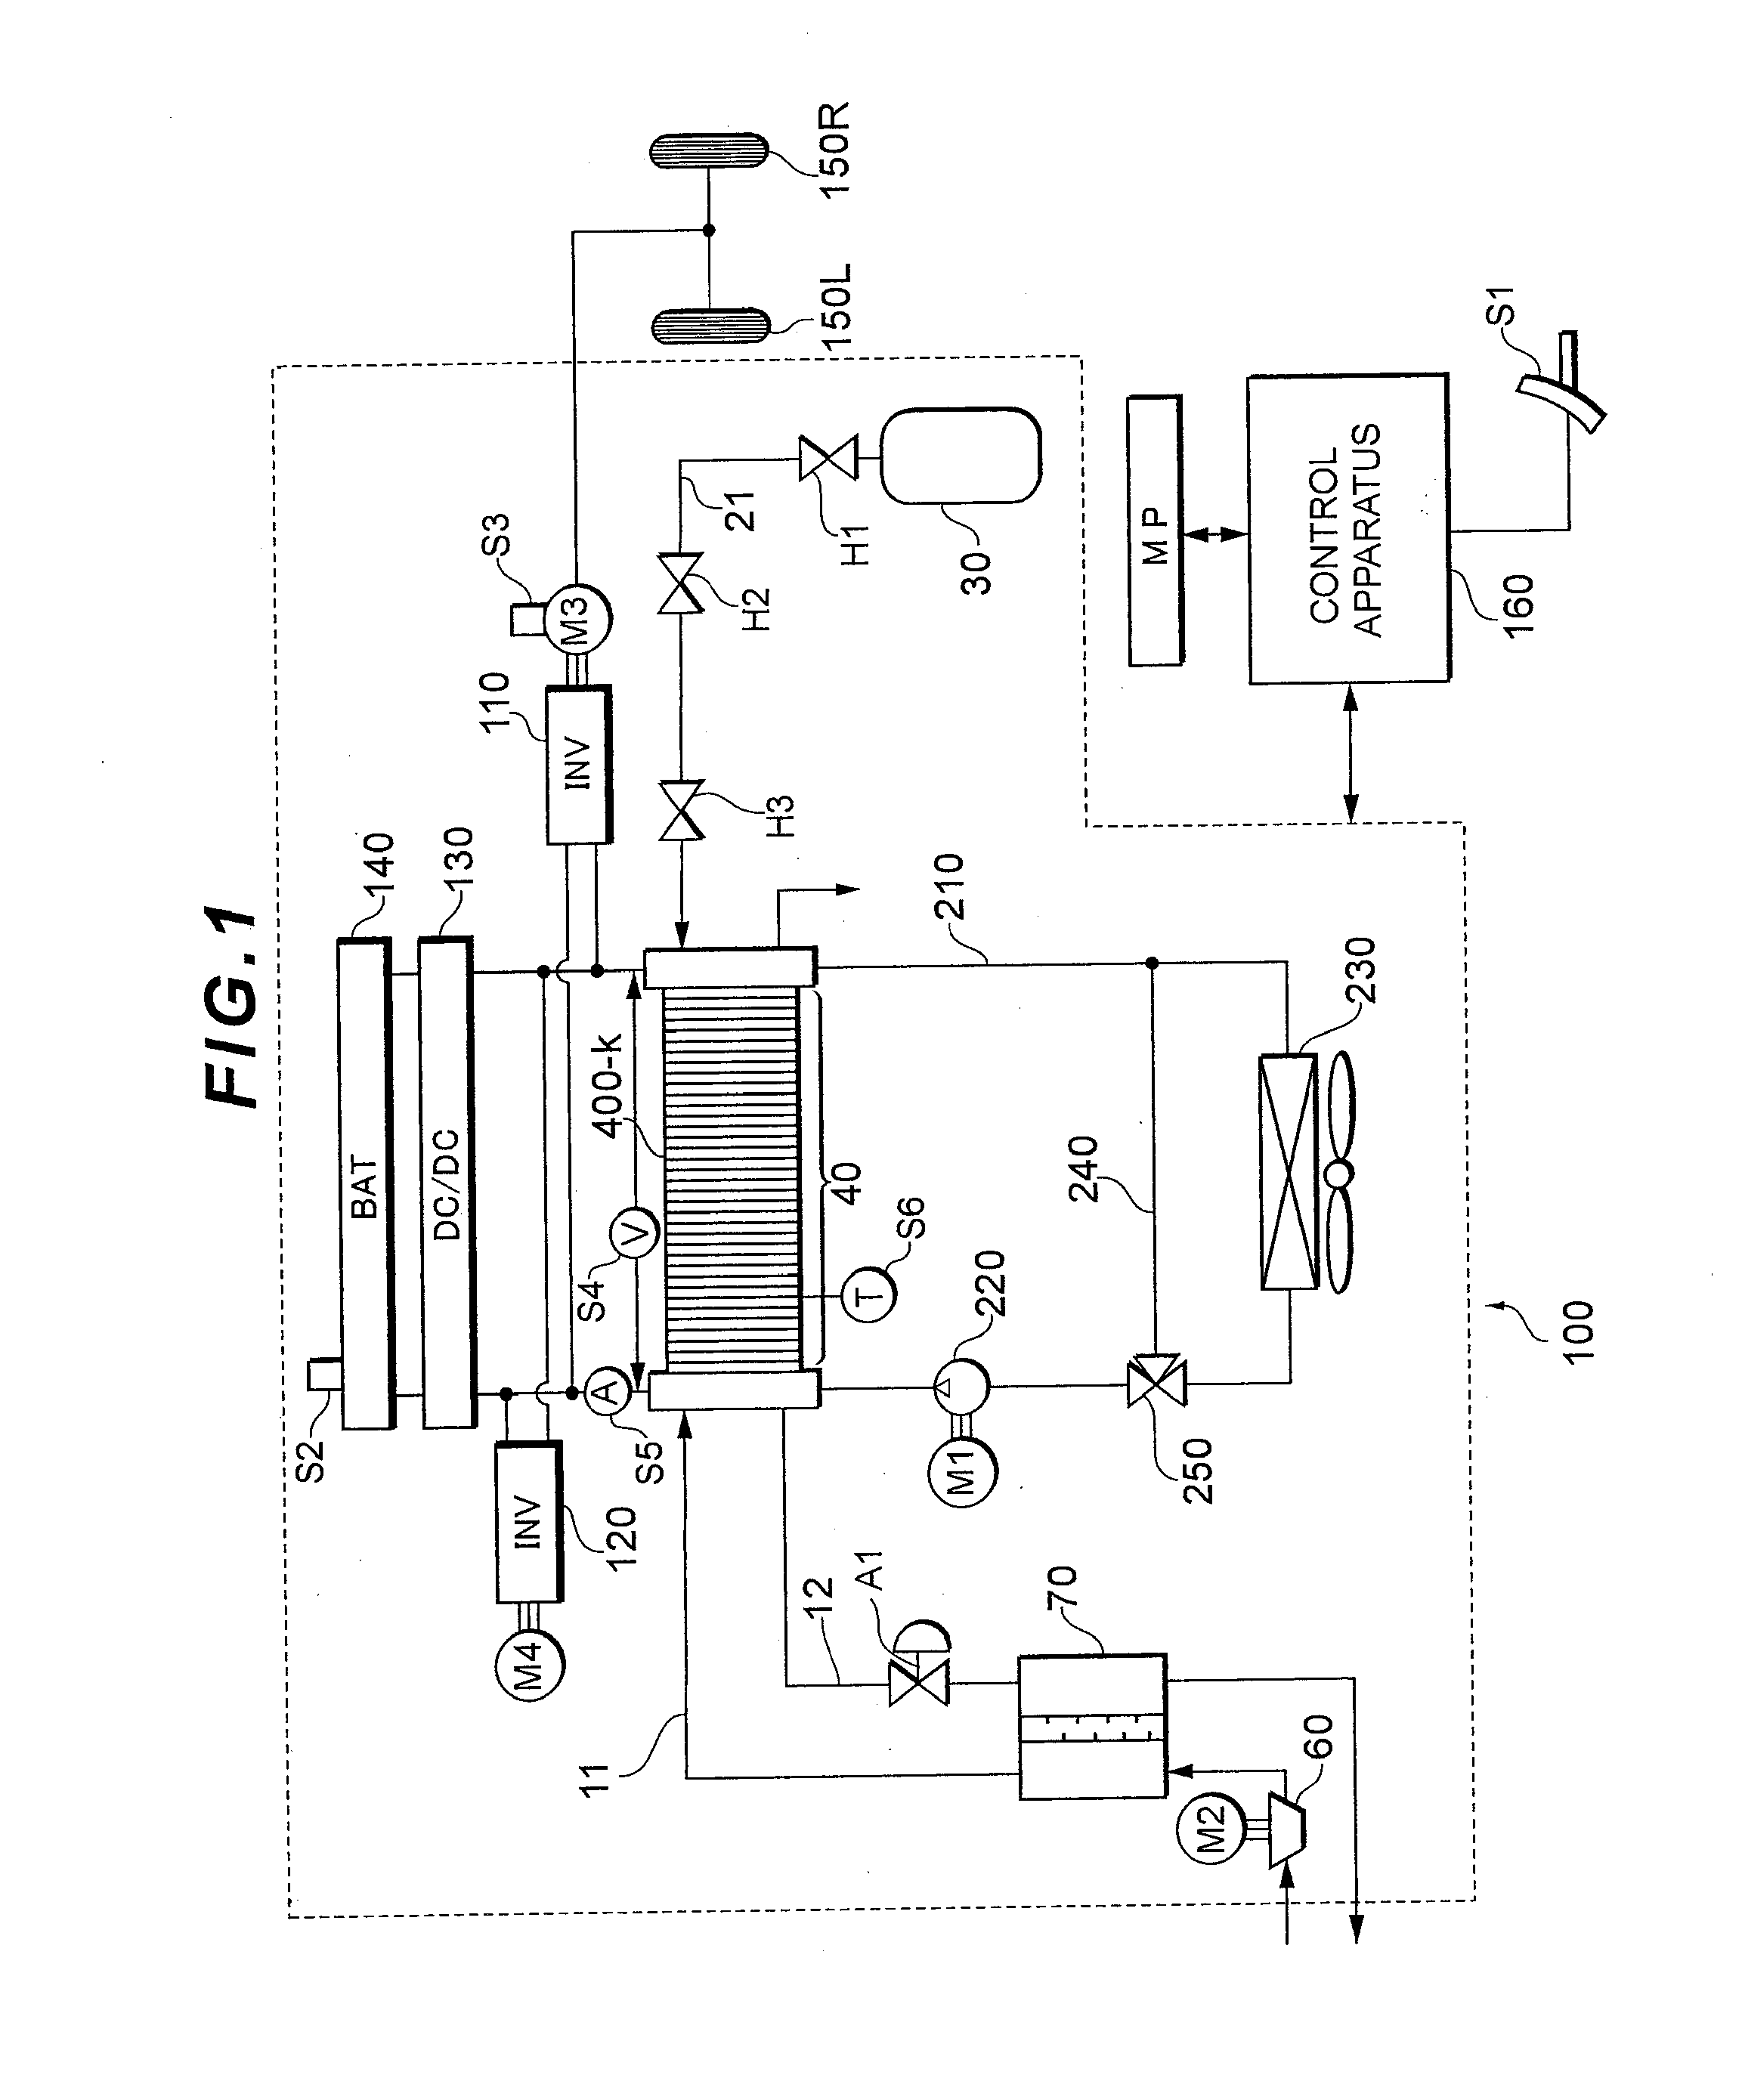 Temperature control system for fuel cell